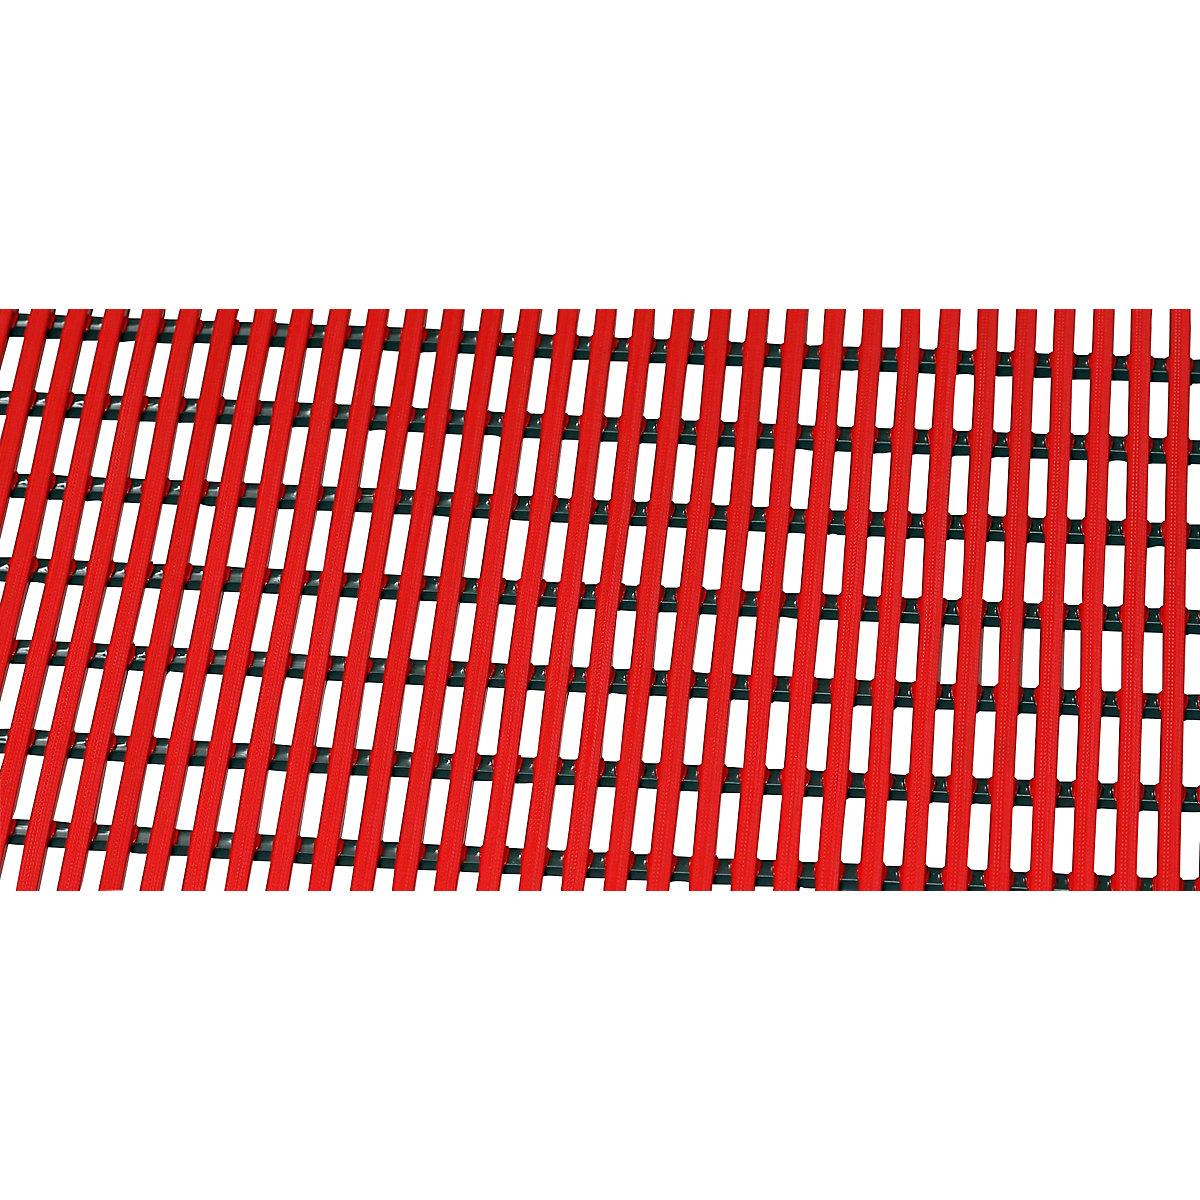 Floor mat for showers and changing rooms, PVC non-rigid, per metre, width 600 mm, red